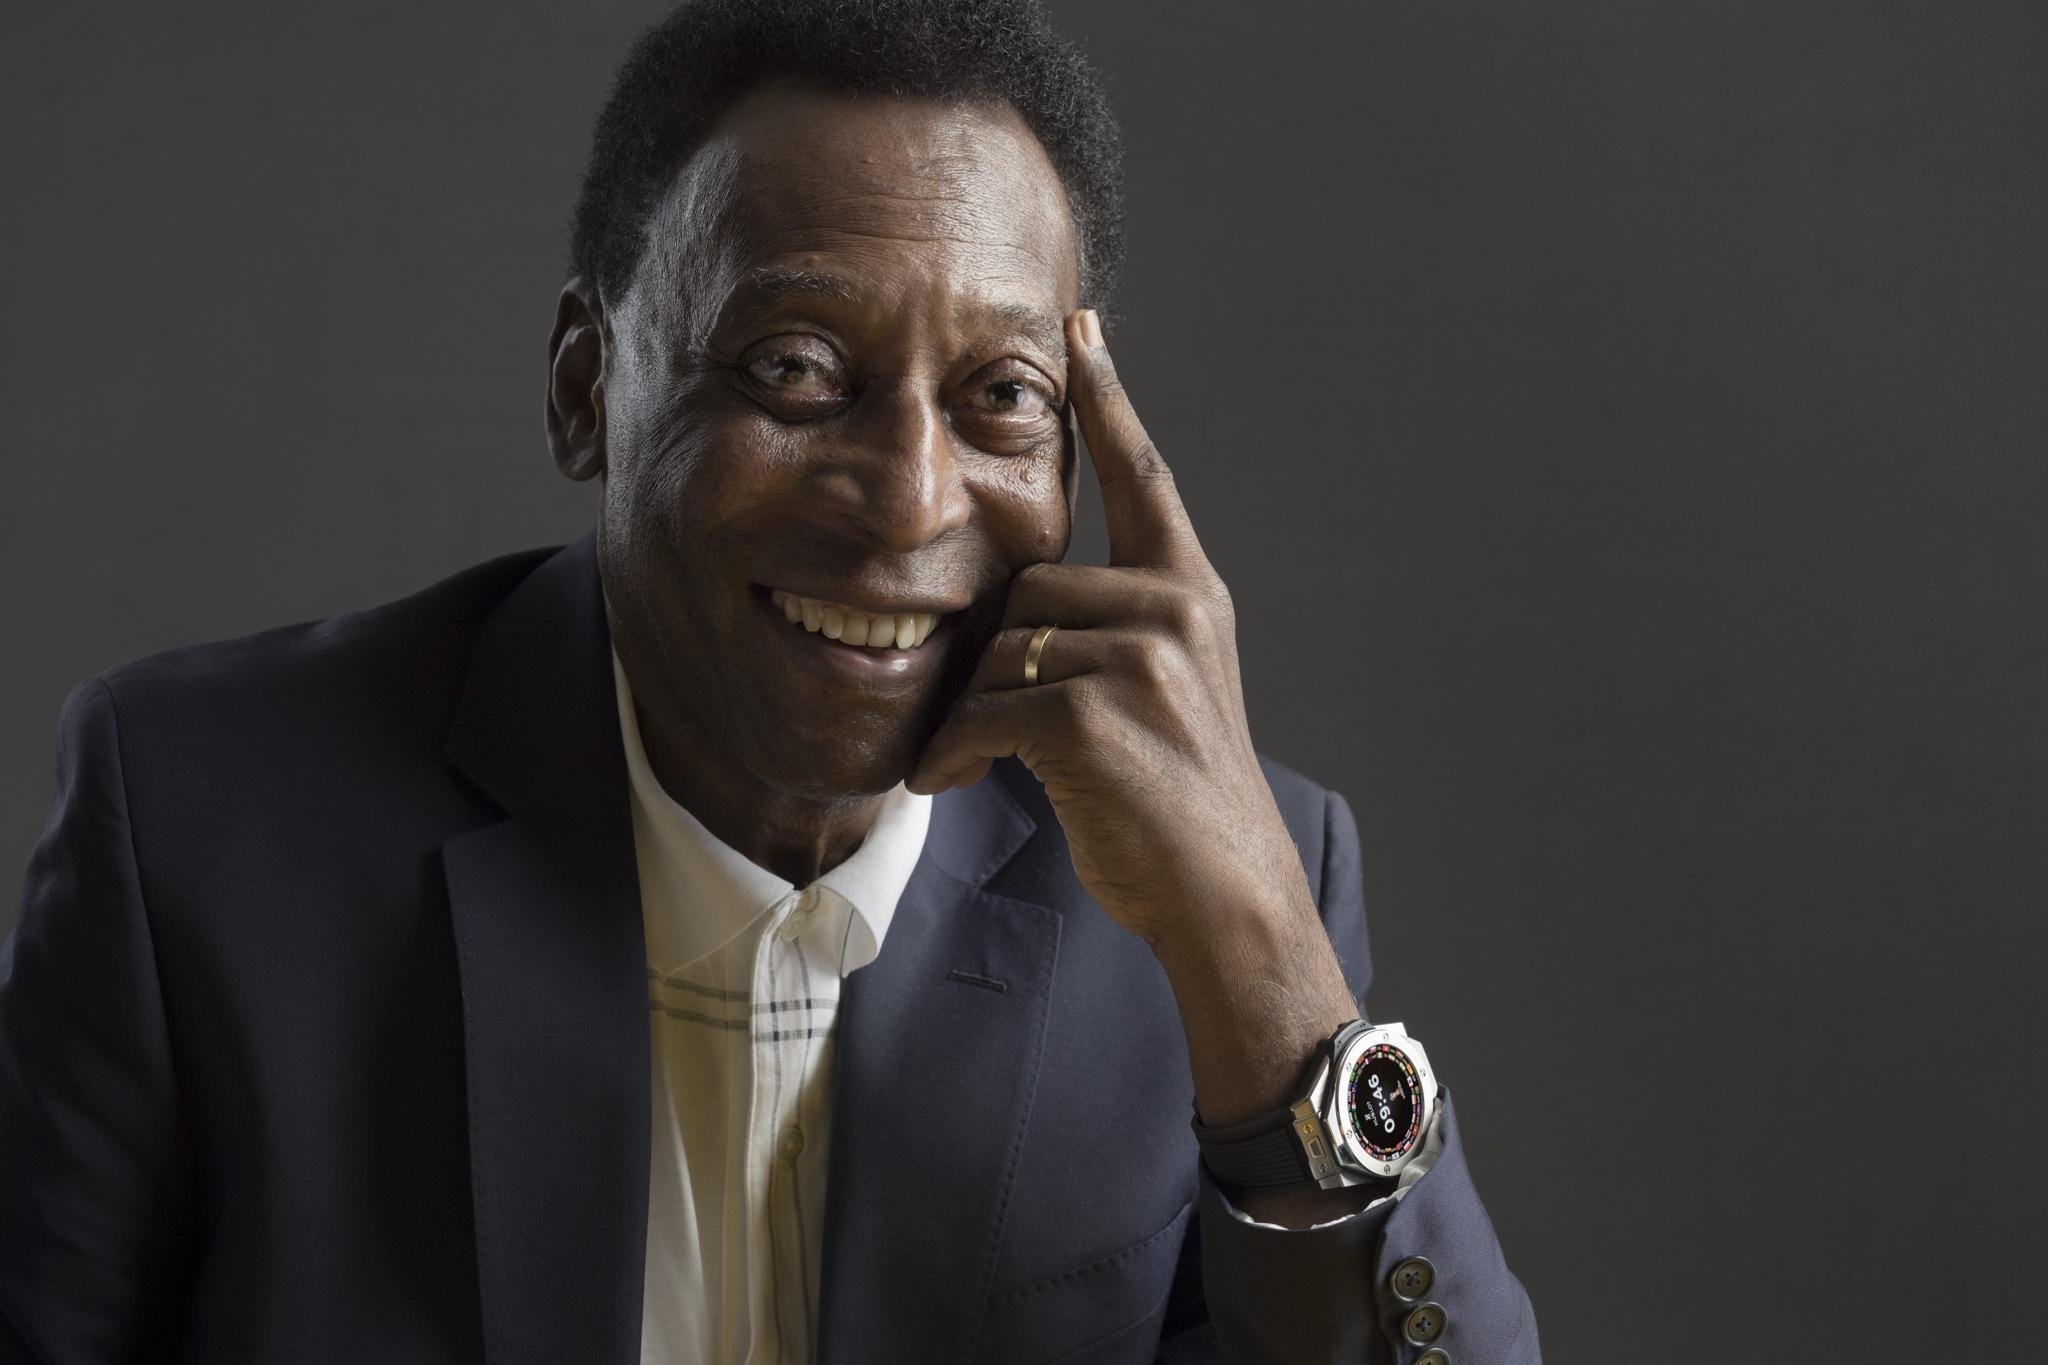 Breaking News: RIP Pelé. Two Hublot Classic Fusion Chronographs Honor his  Legacy. — WATCH COLLECTING LIFESTYLE